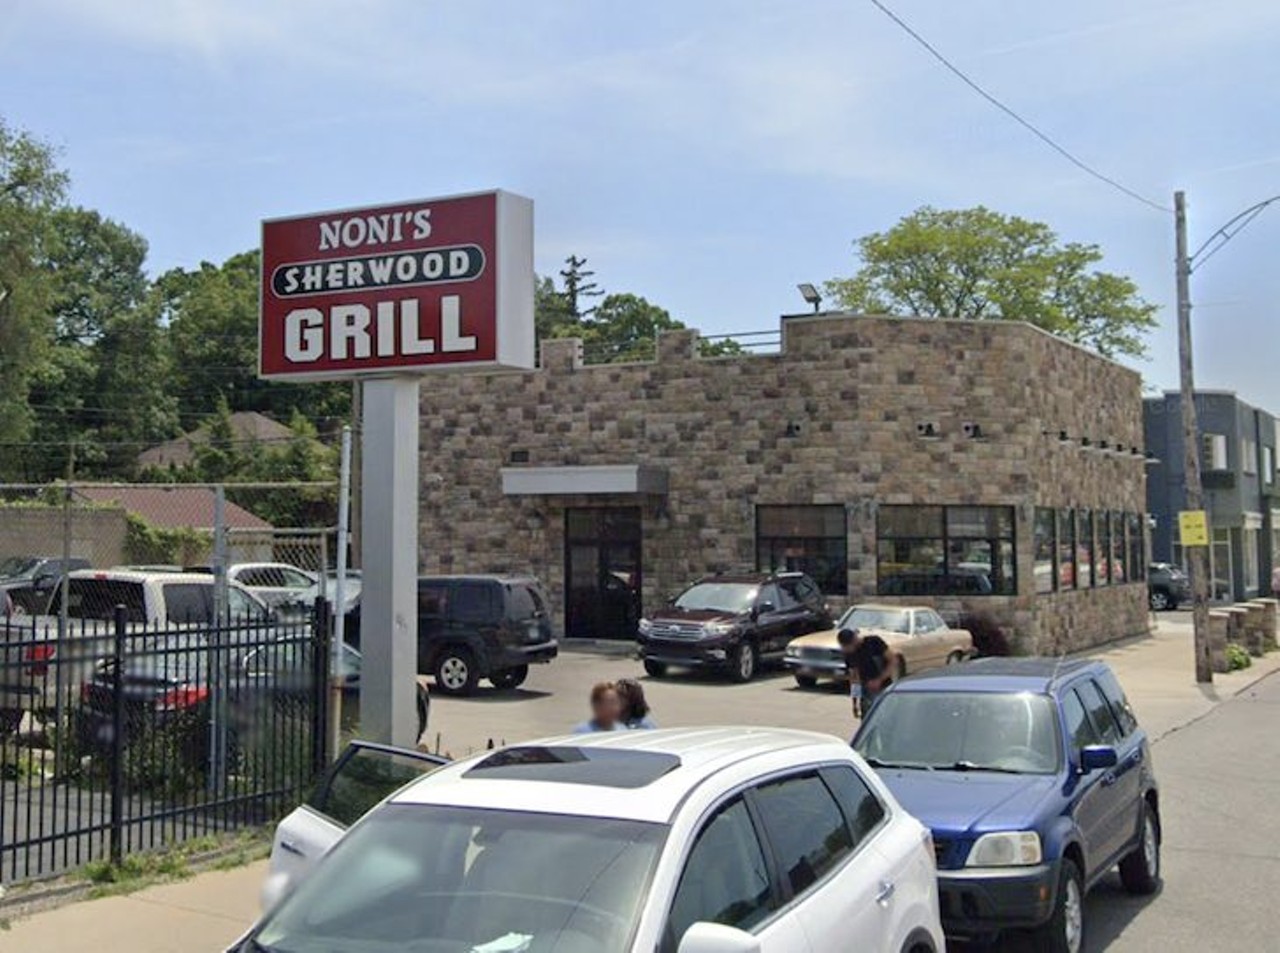 Noni&#146;s Sherwood Grille
19700 Livernois Ave., Detroit; 313-342-6000; nonissherwood.com
Depending how old you are, you might still call Noni&#146;s Sherwood Grille, Sherwood Forest Coney Island. The coney has been a staple in the Sherwood Forest neighborhood for years. 
Photo via Google Maps